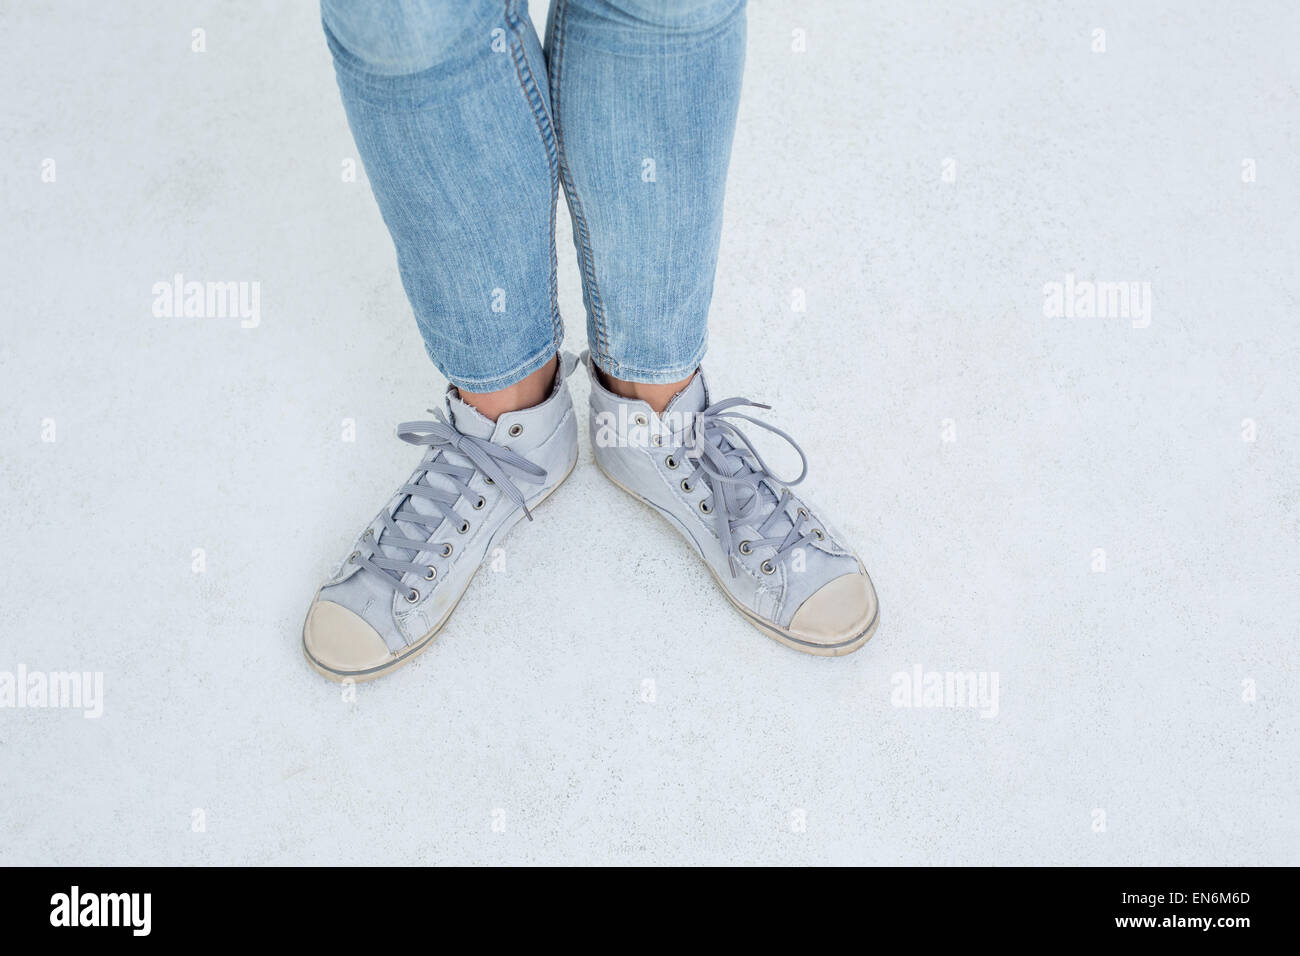 Woman wearing trainers Stock Photo